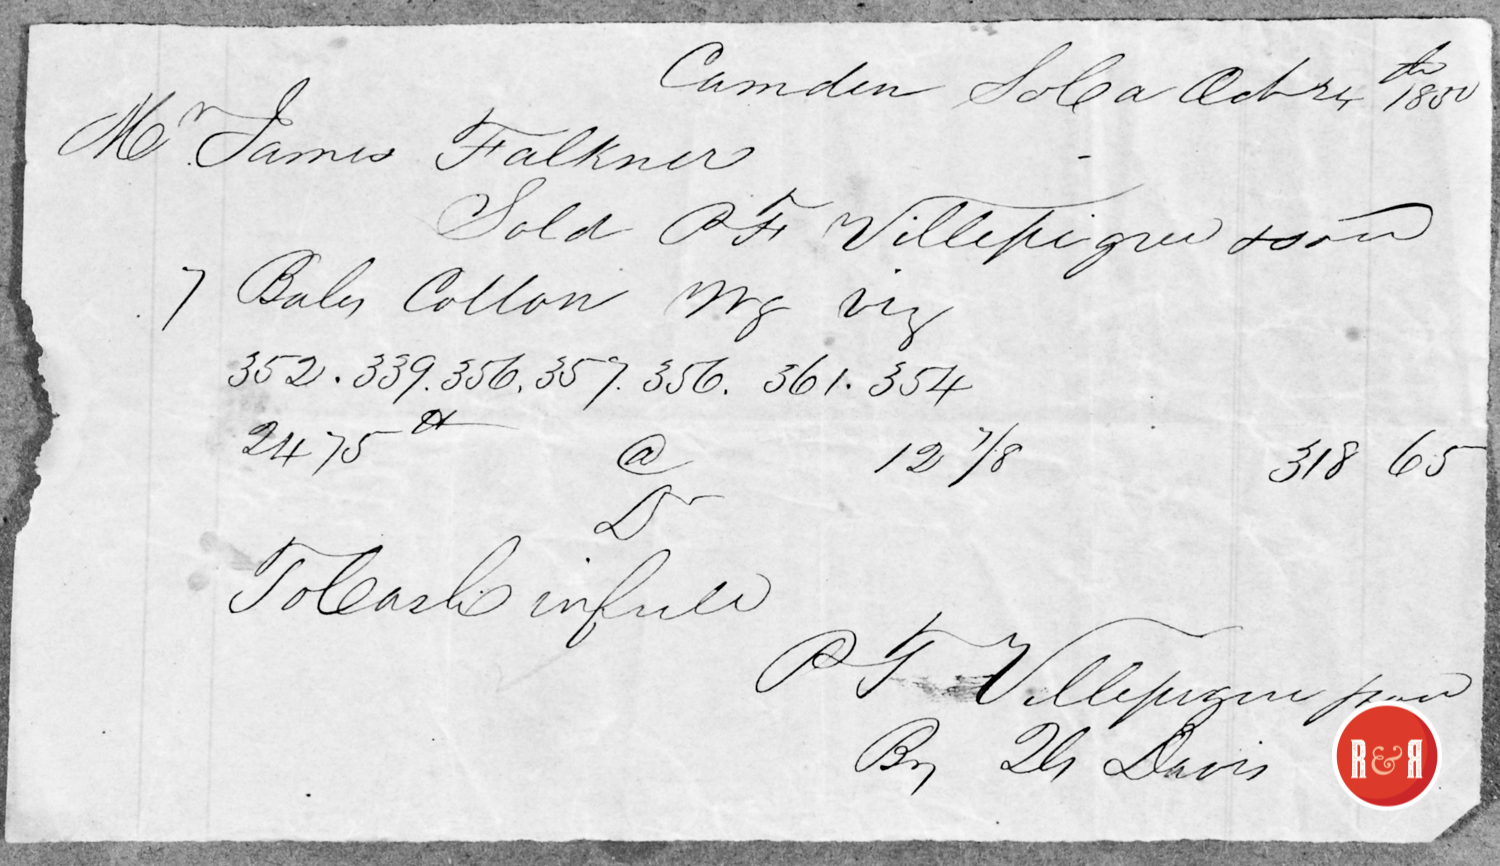 RECEIPT FOR COTTON PURCHASES FROM PAUL F. VILLIPEQUE - 1850